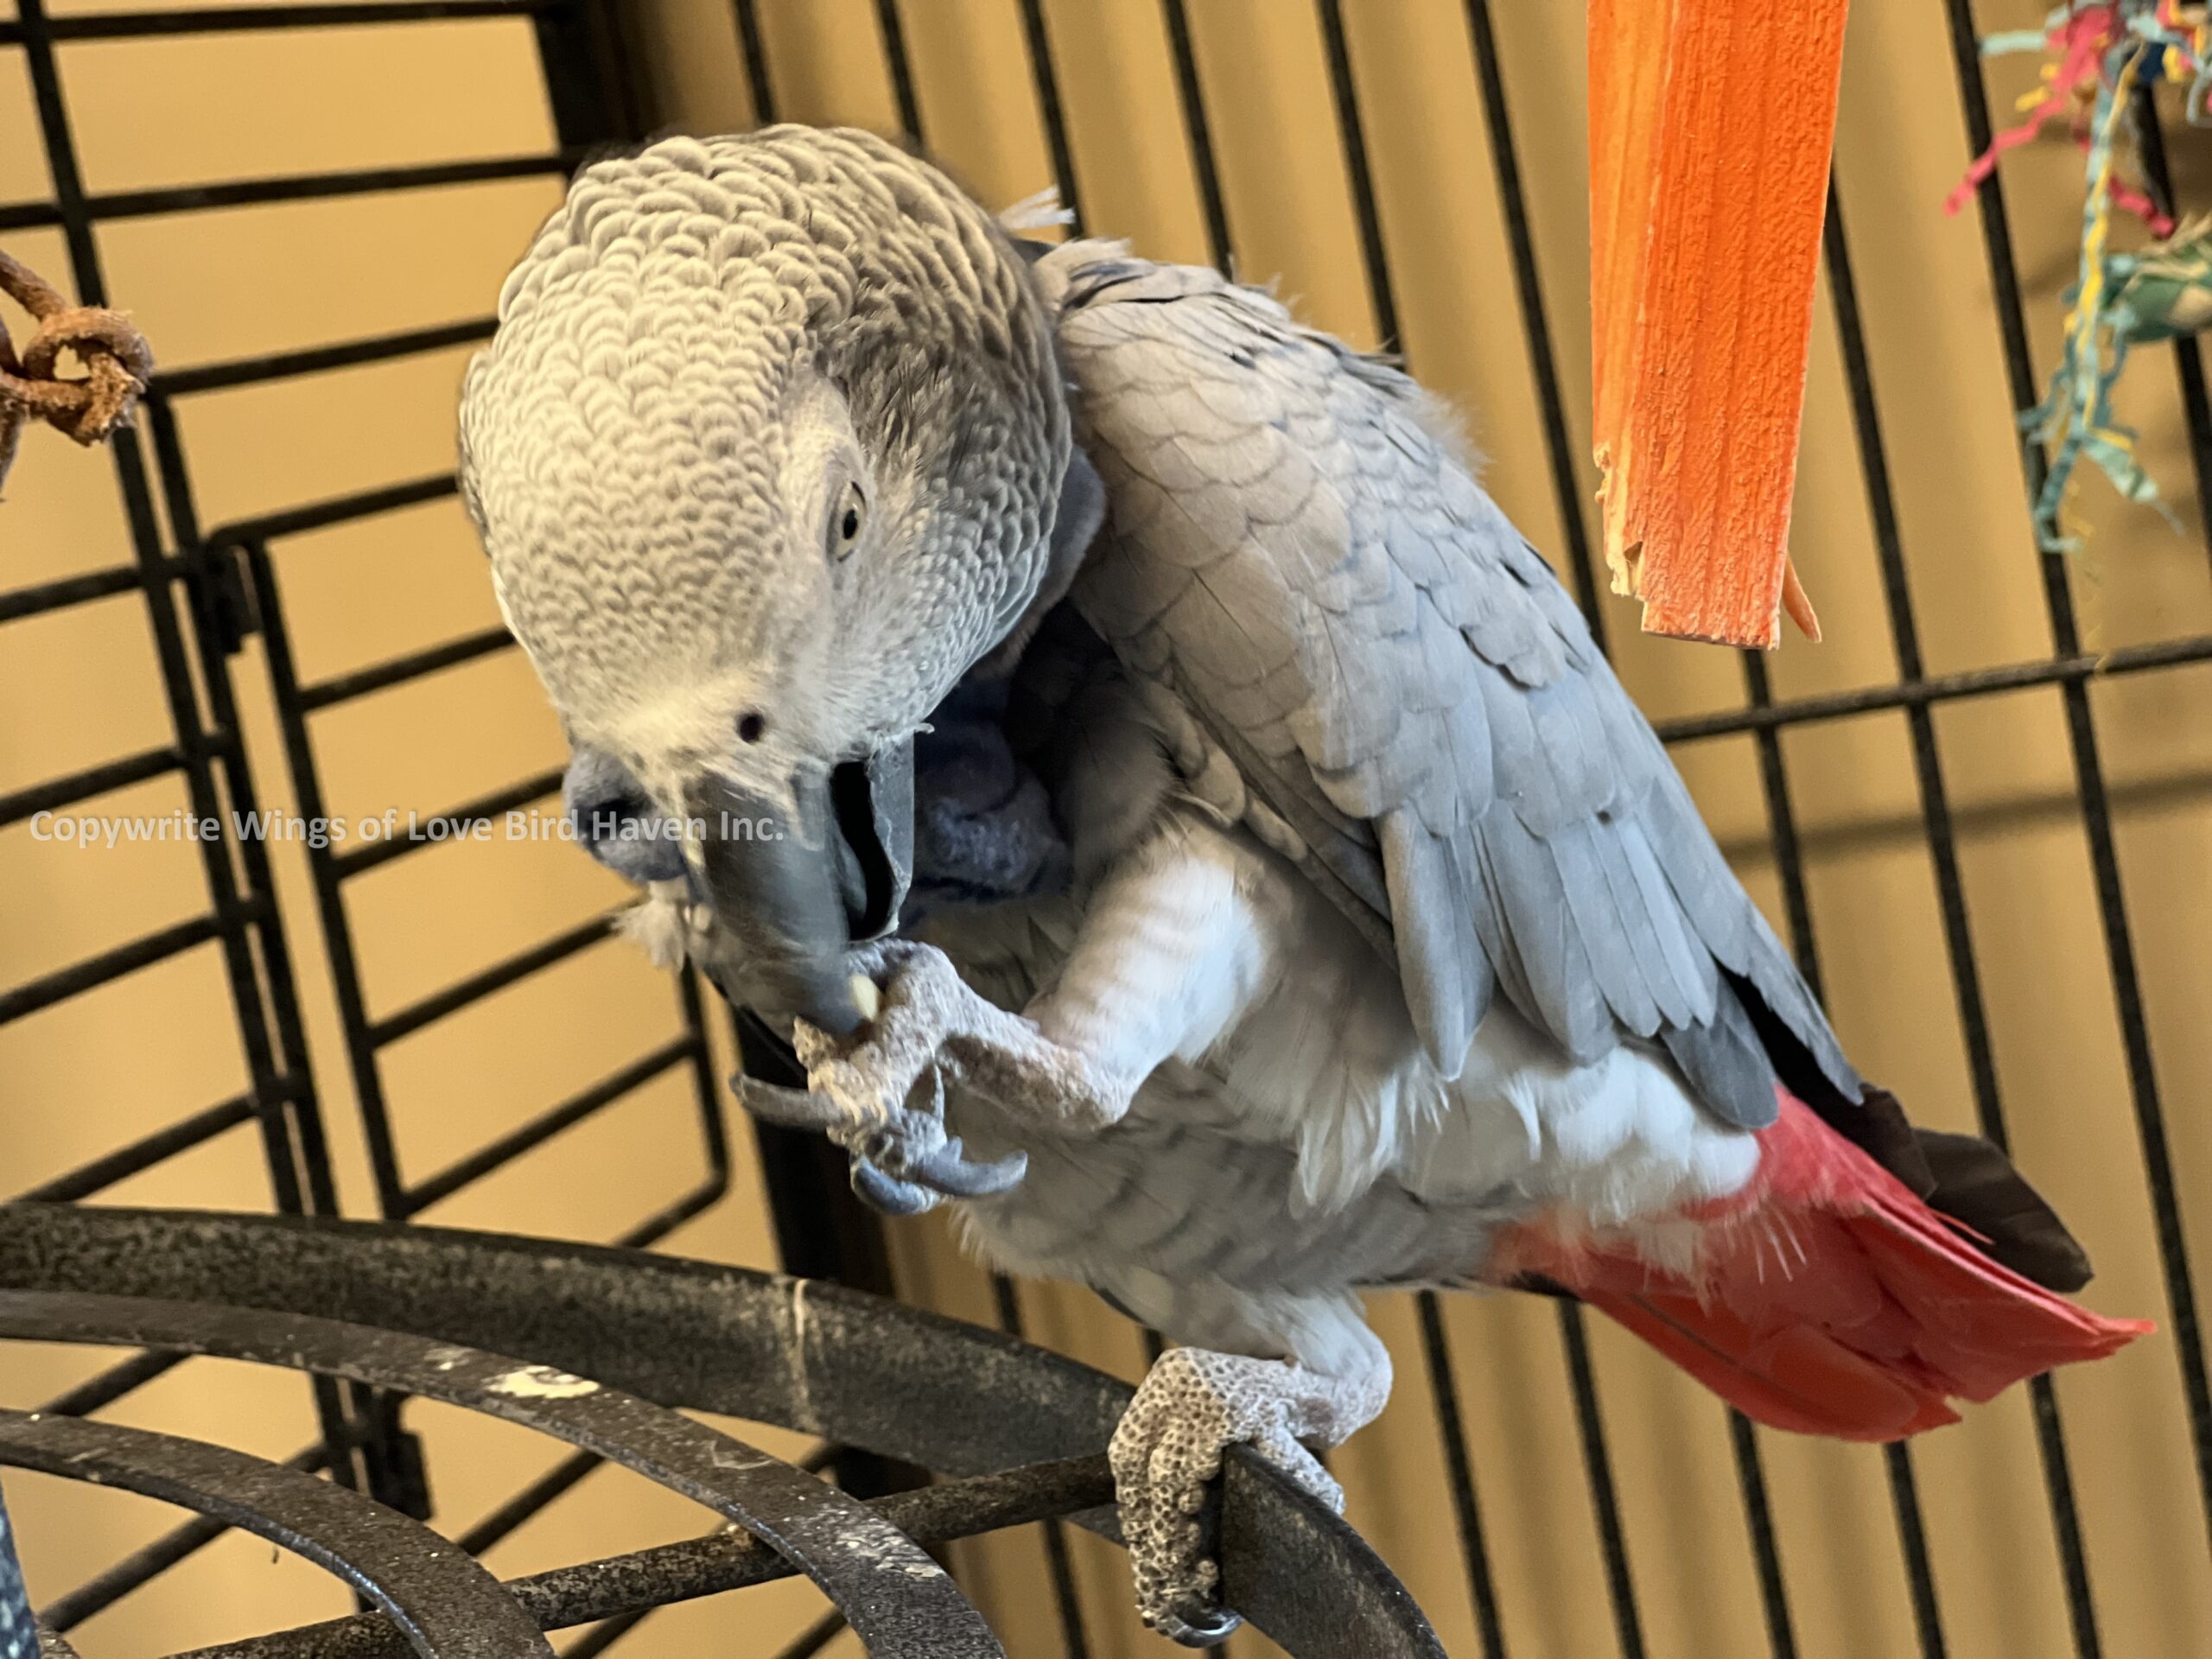 Where is the Best place to buy or adopt a parrot in Texas?